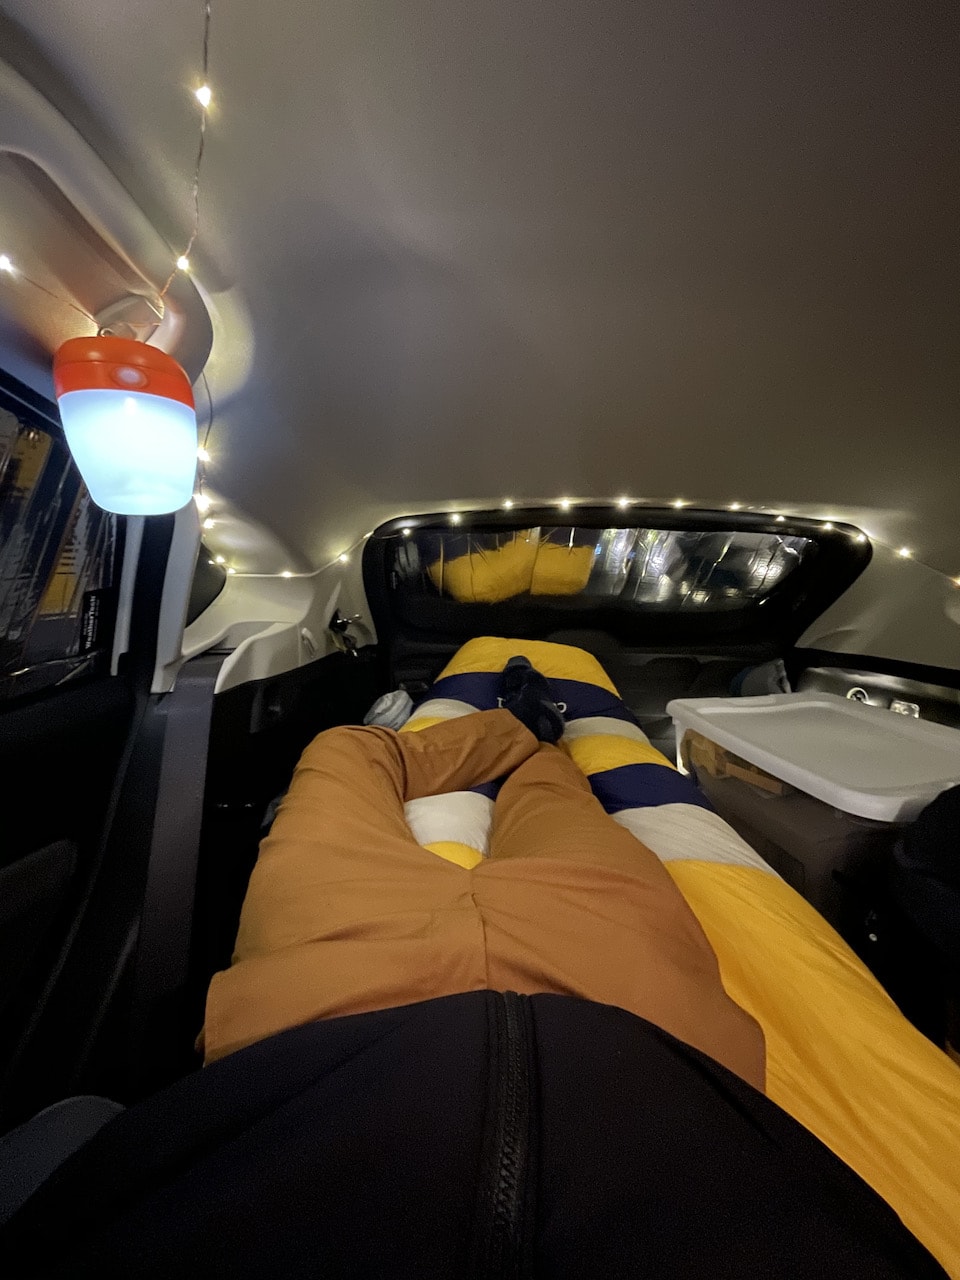 How to Sleep Comfortably in a Car While Car-Camping